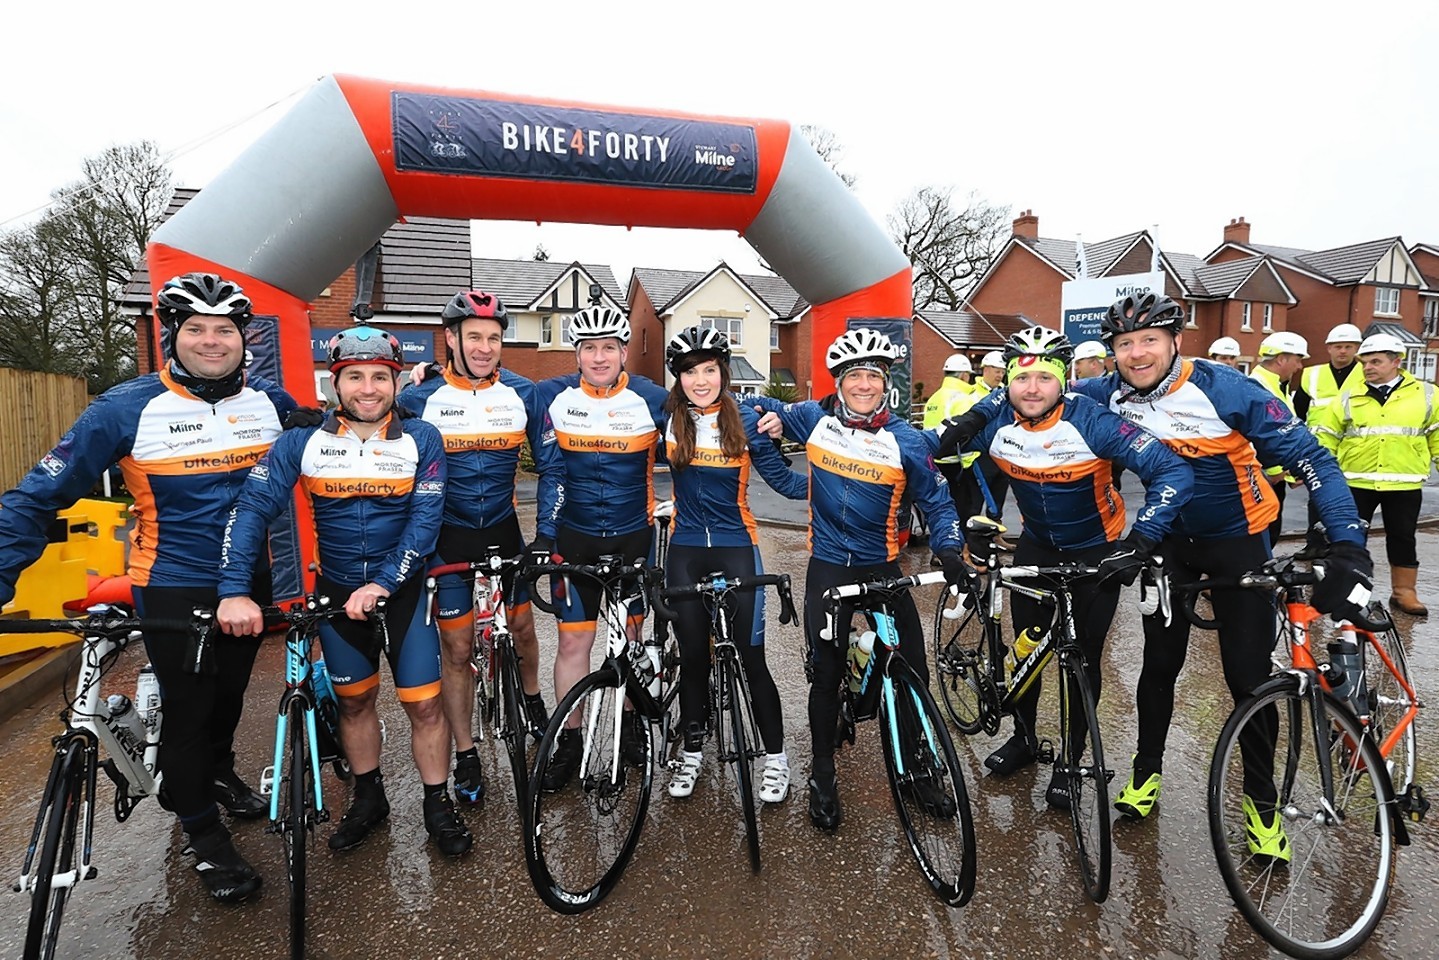 The Stewart Milne cyclists in Manchester